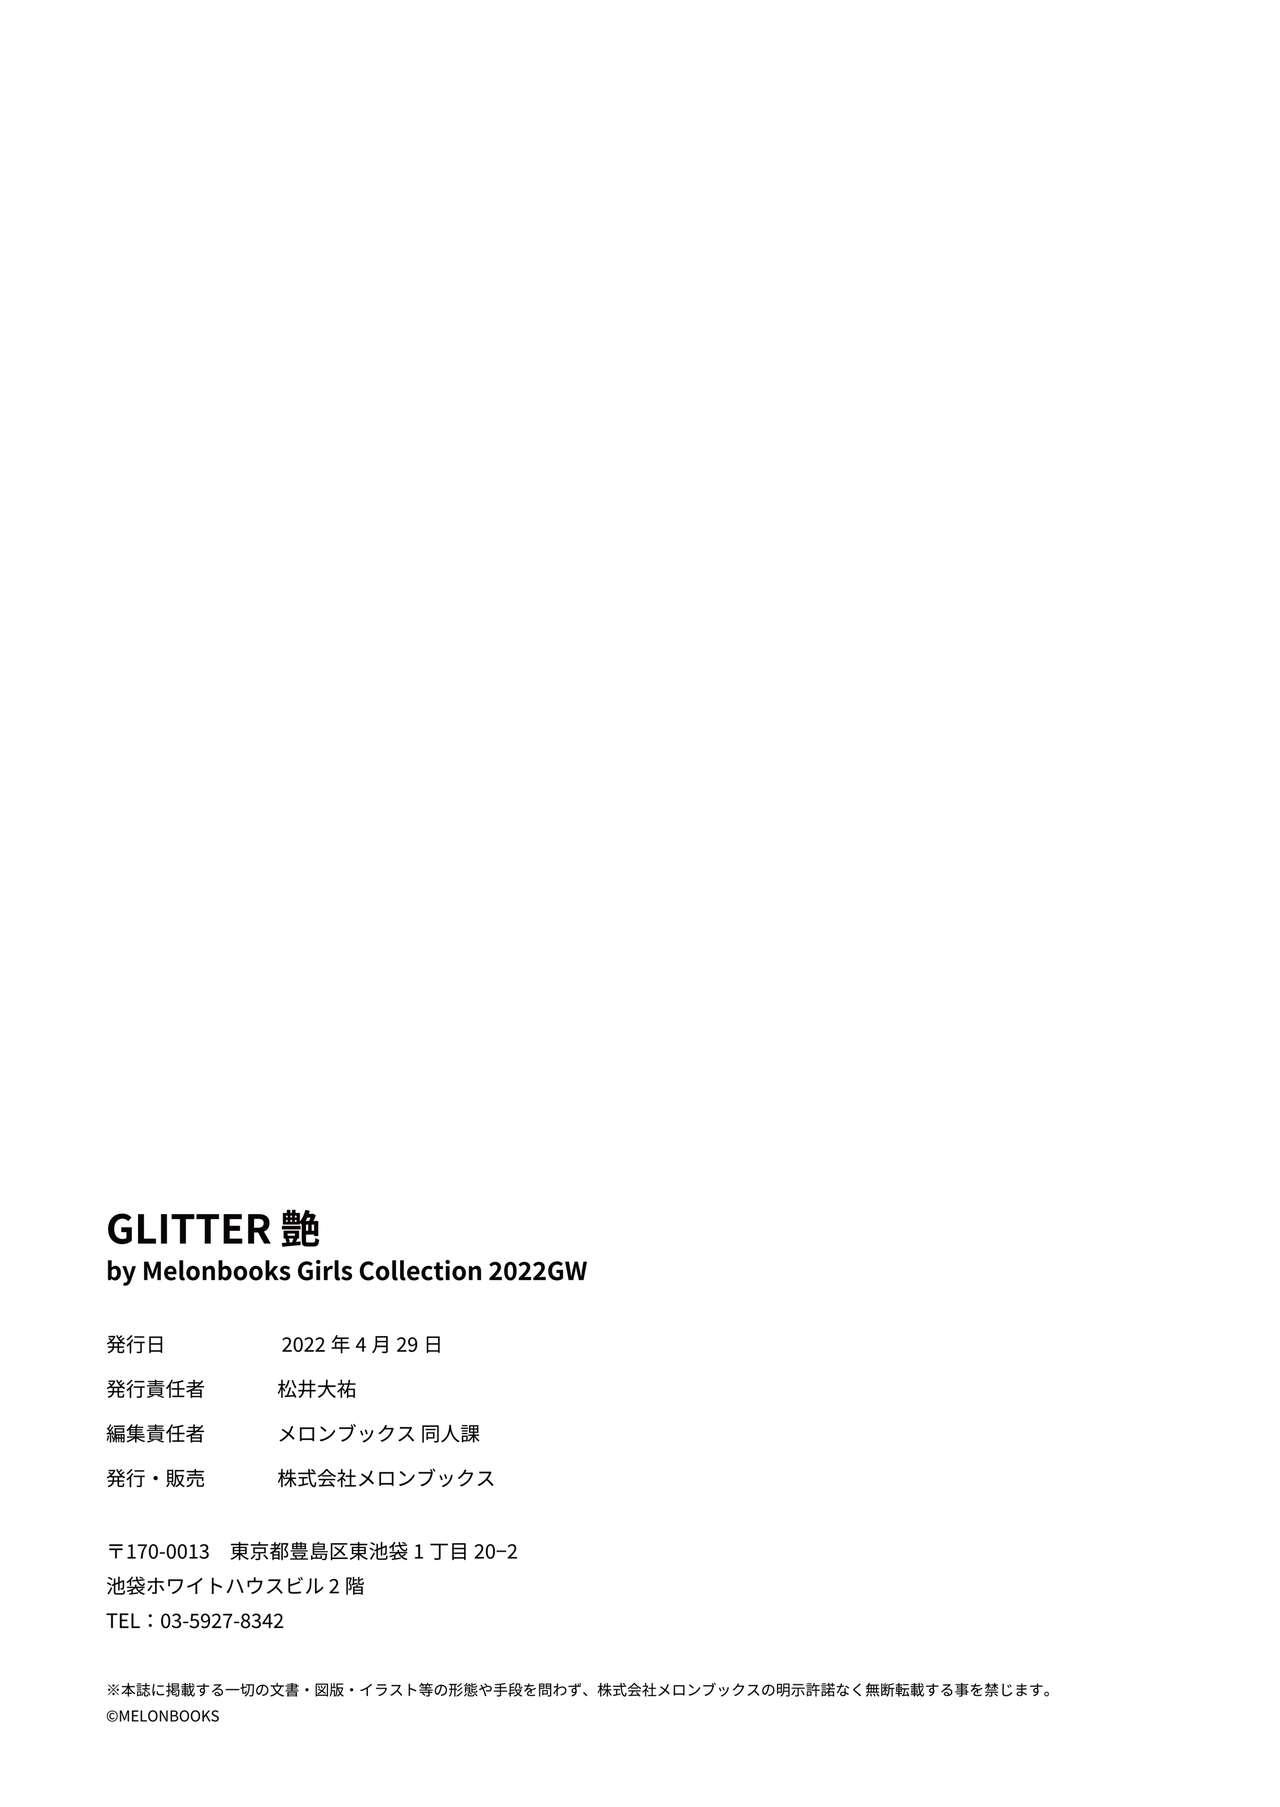 GLITTER 艶 by Melonbooks Girls Collection 2022GW 102